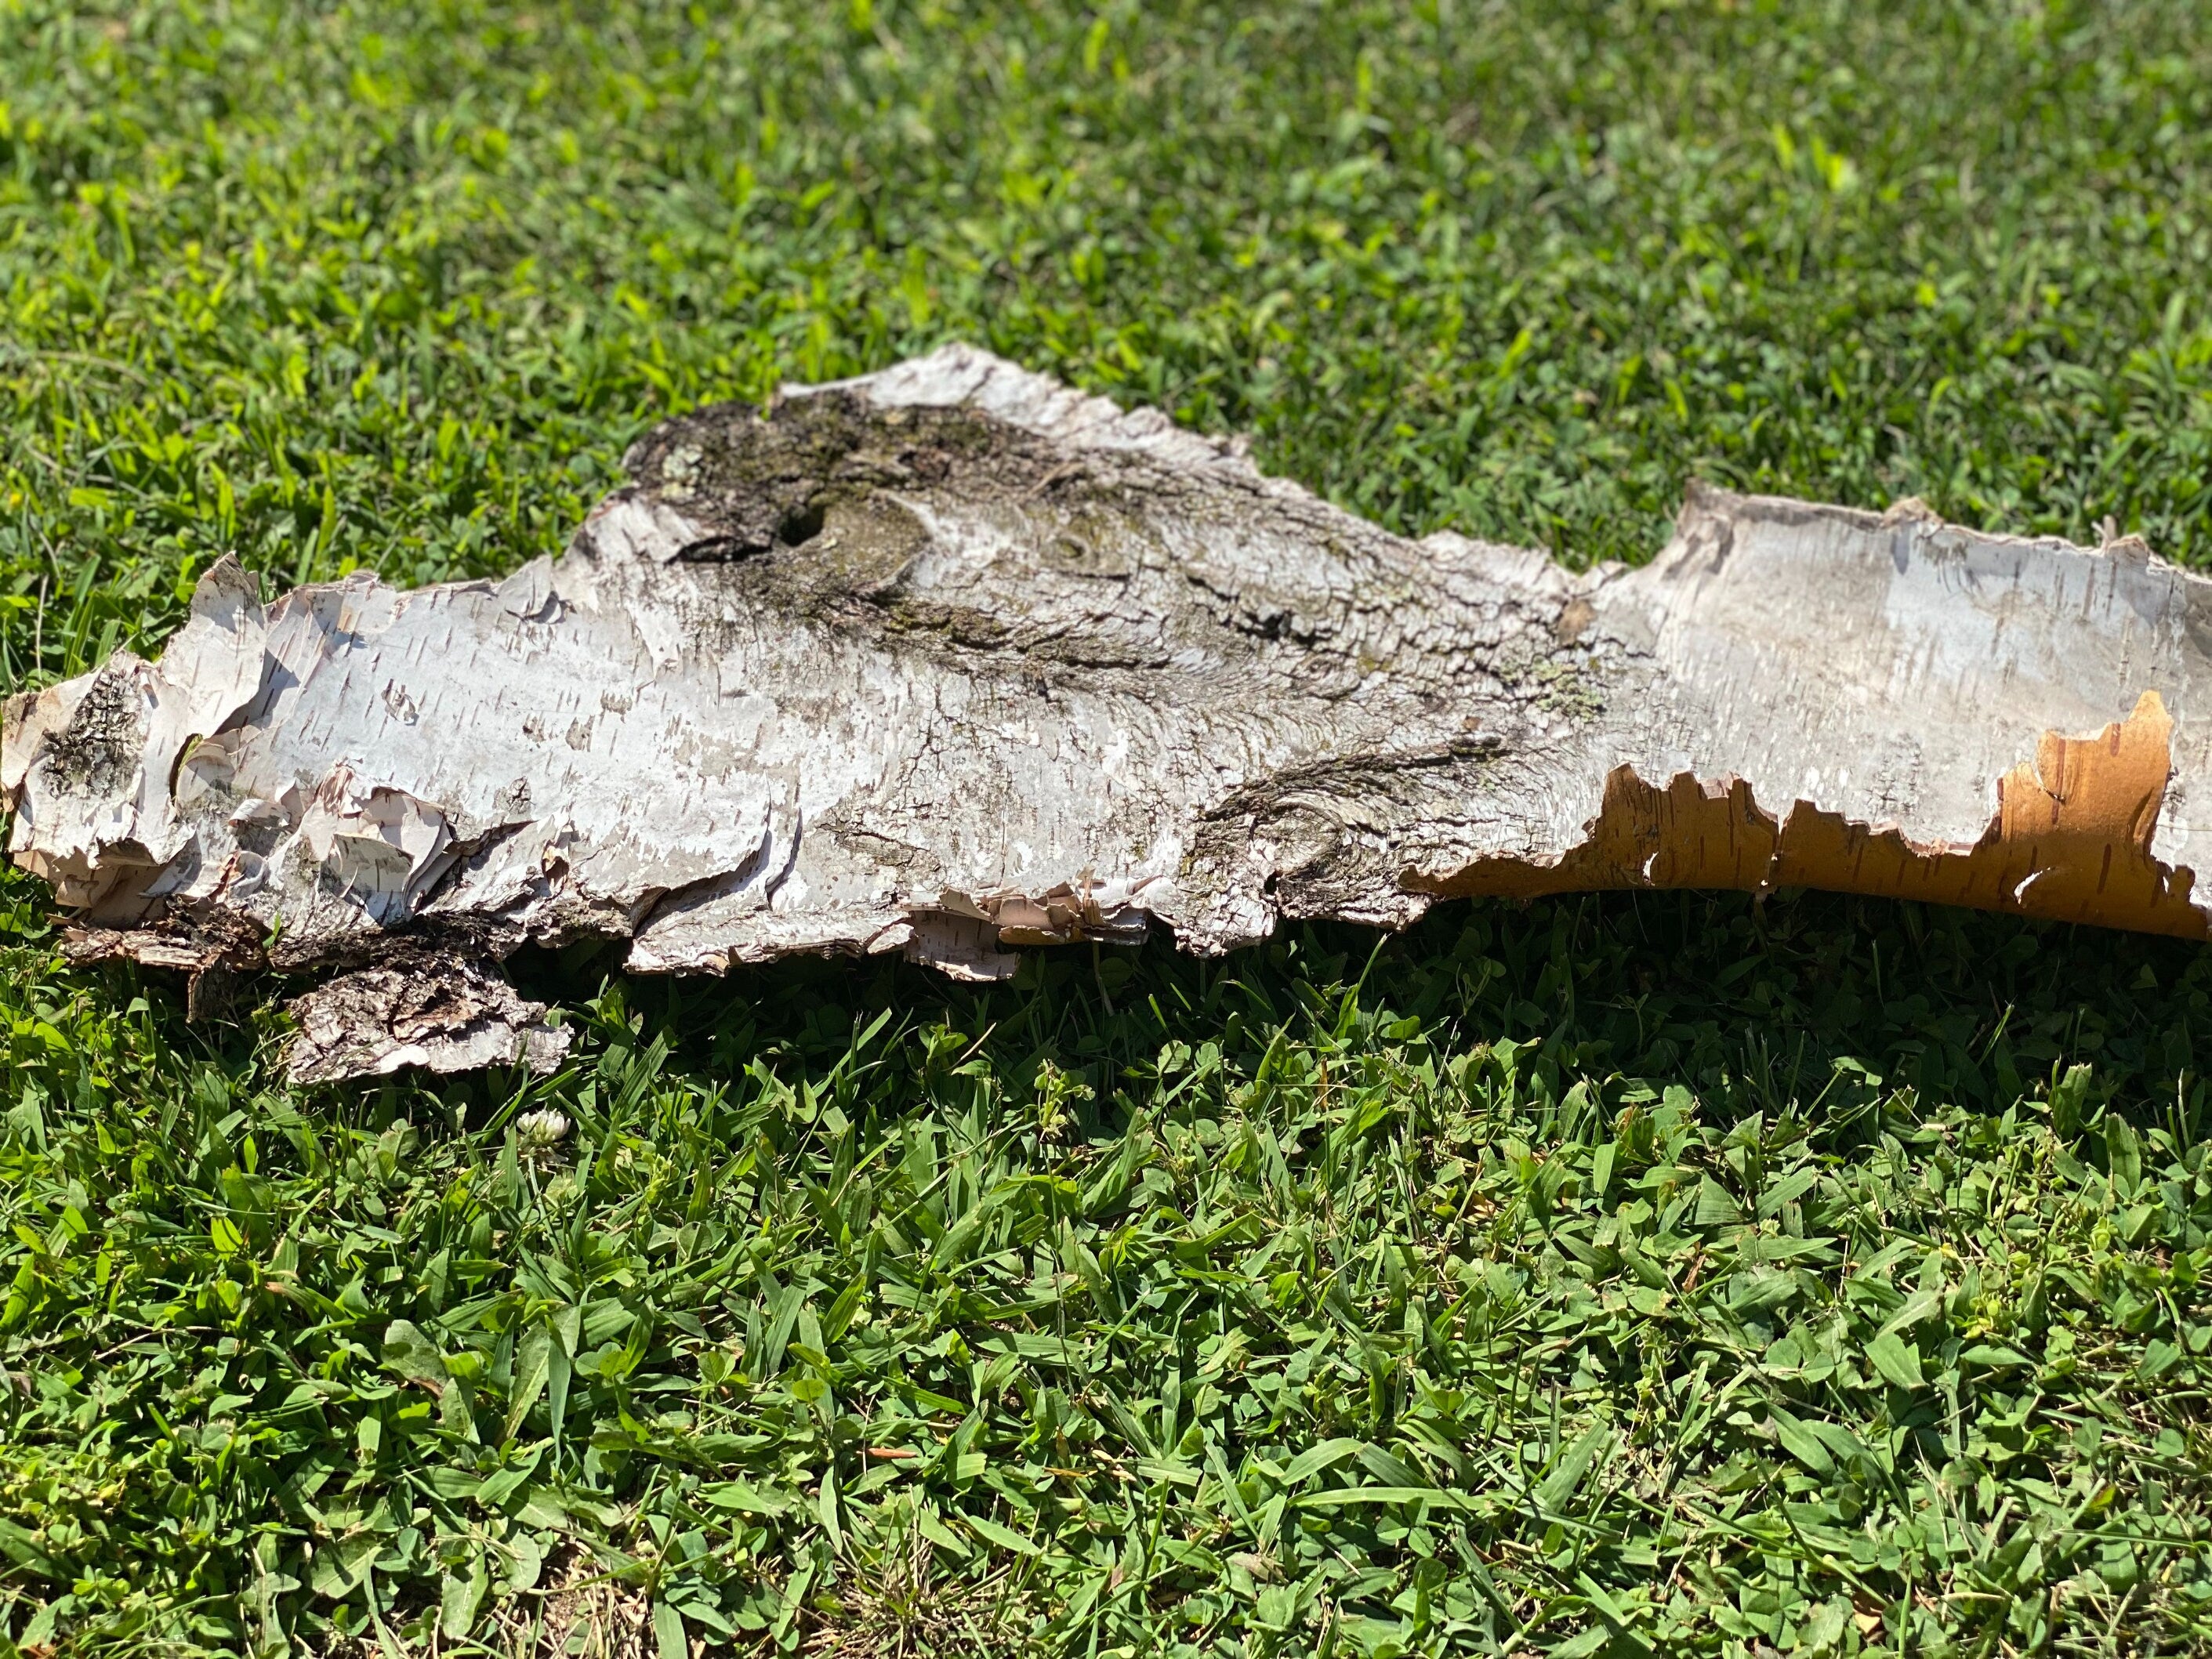 White Birch Bark with Live Natural Moss, Approximately 26 Inches Long by 11 Inches Wide